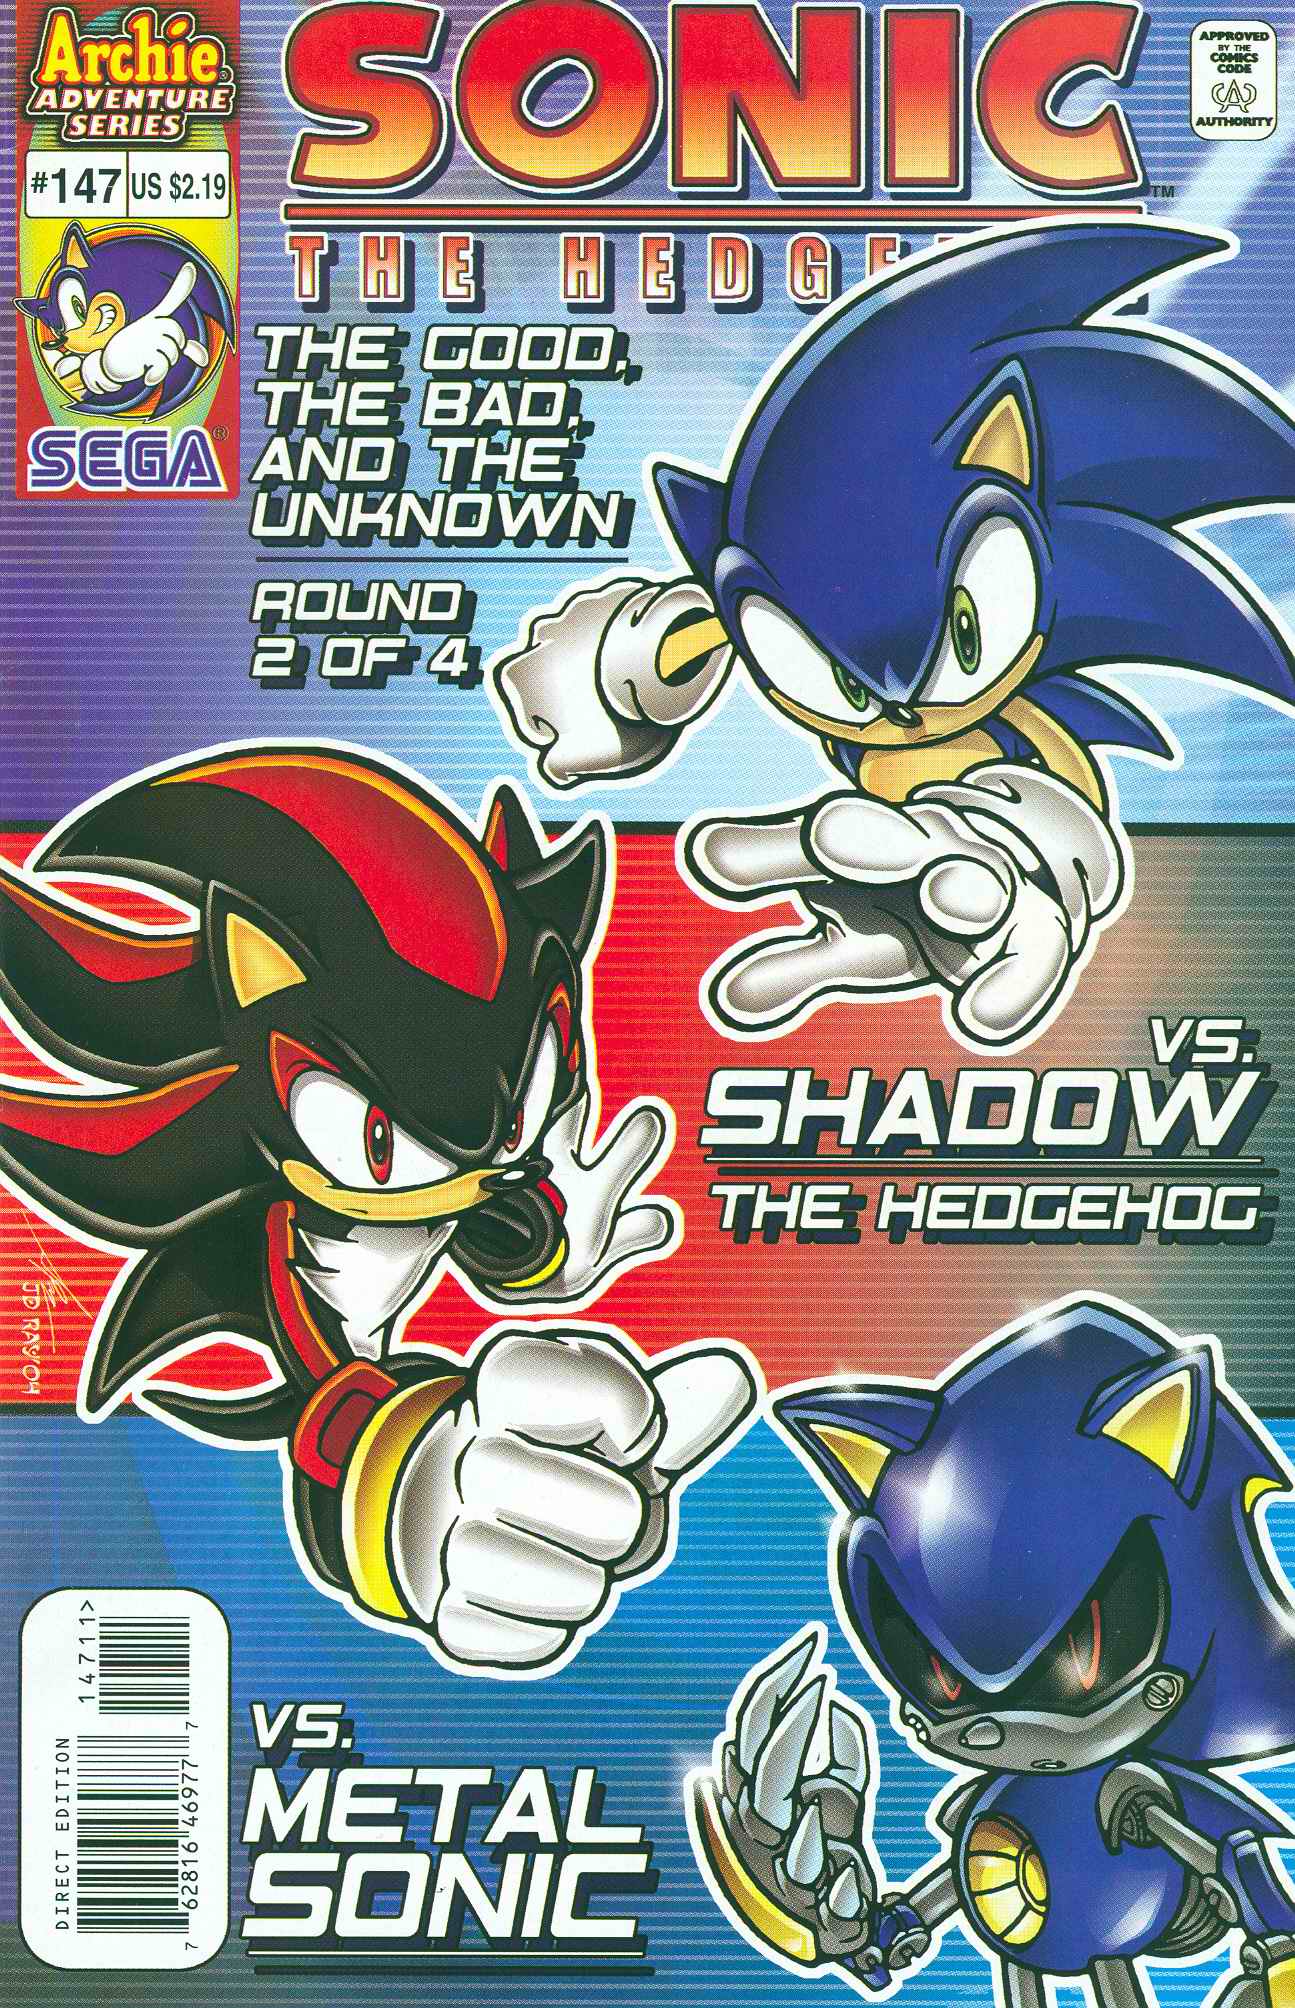 Sonic - Archie Adventure Series May 2005 Comic cover page